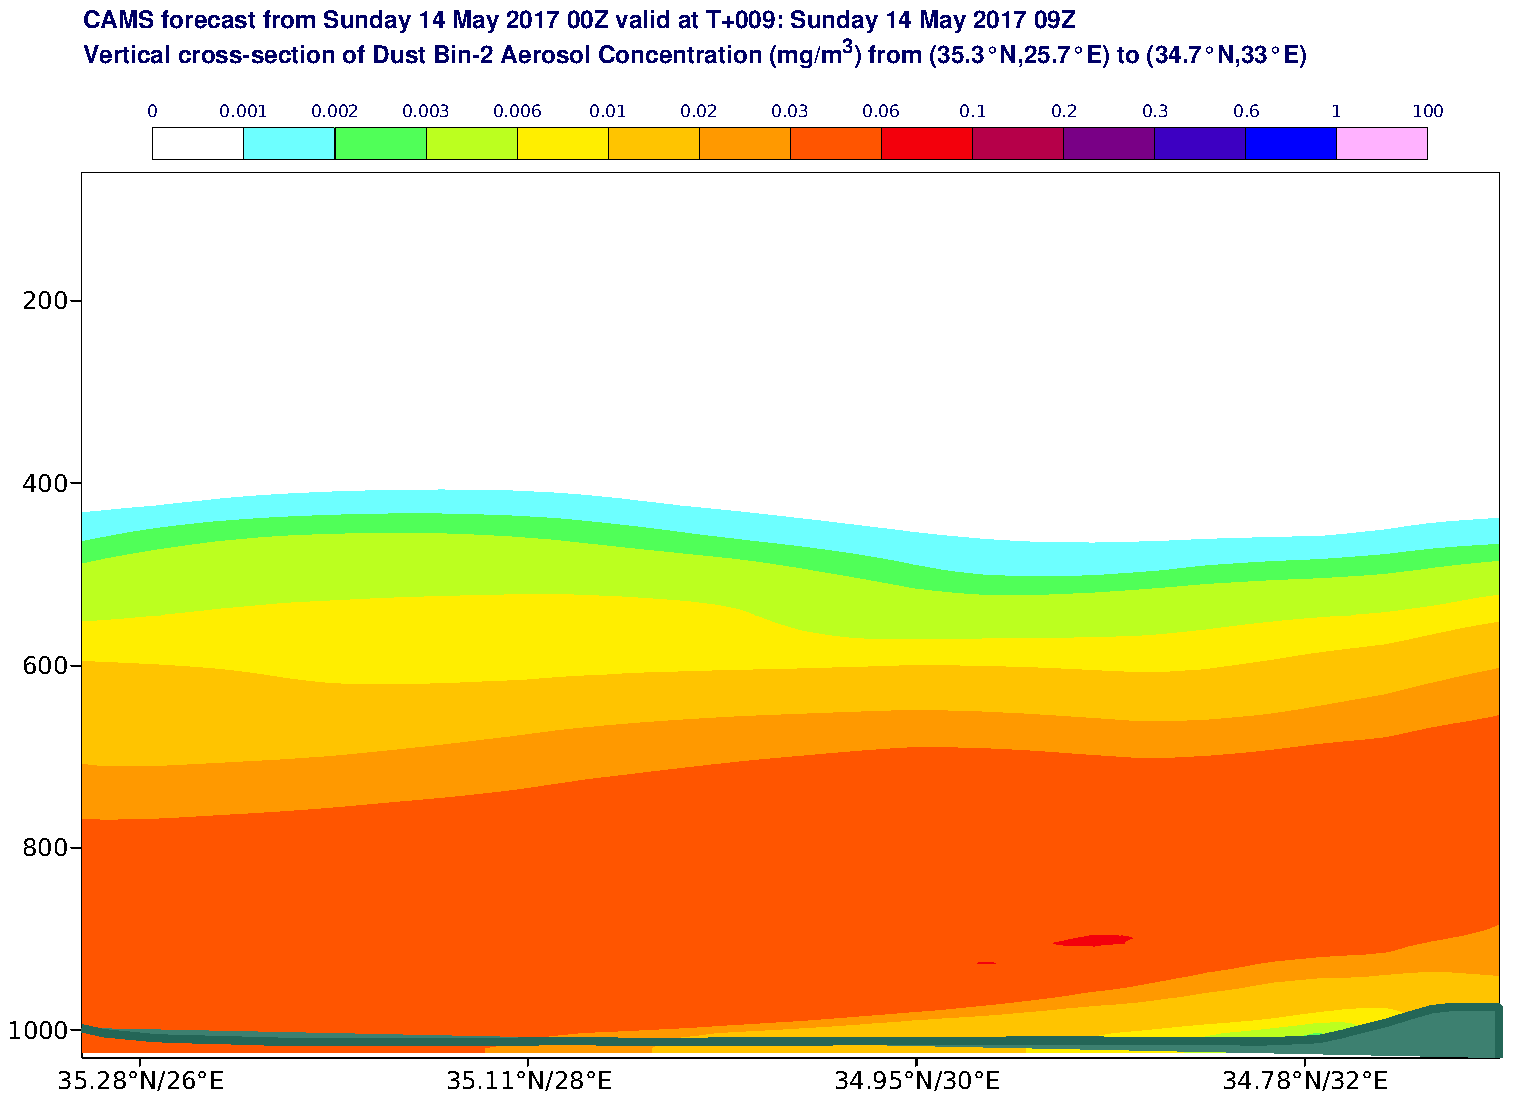 Vertical cross-section of Dust Bin-2 Aerosol Concentration (mg/m3) valid at T9 - 2017-05-14 09:00